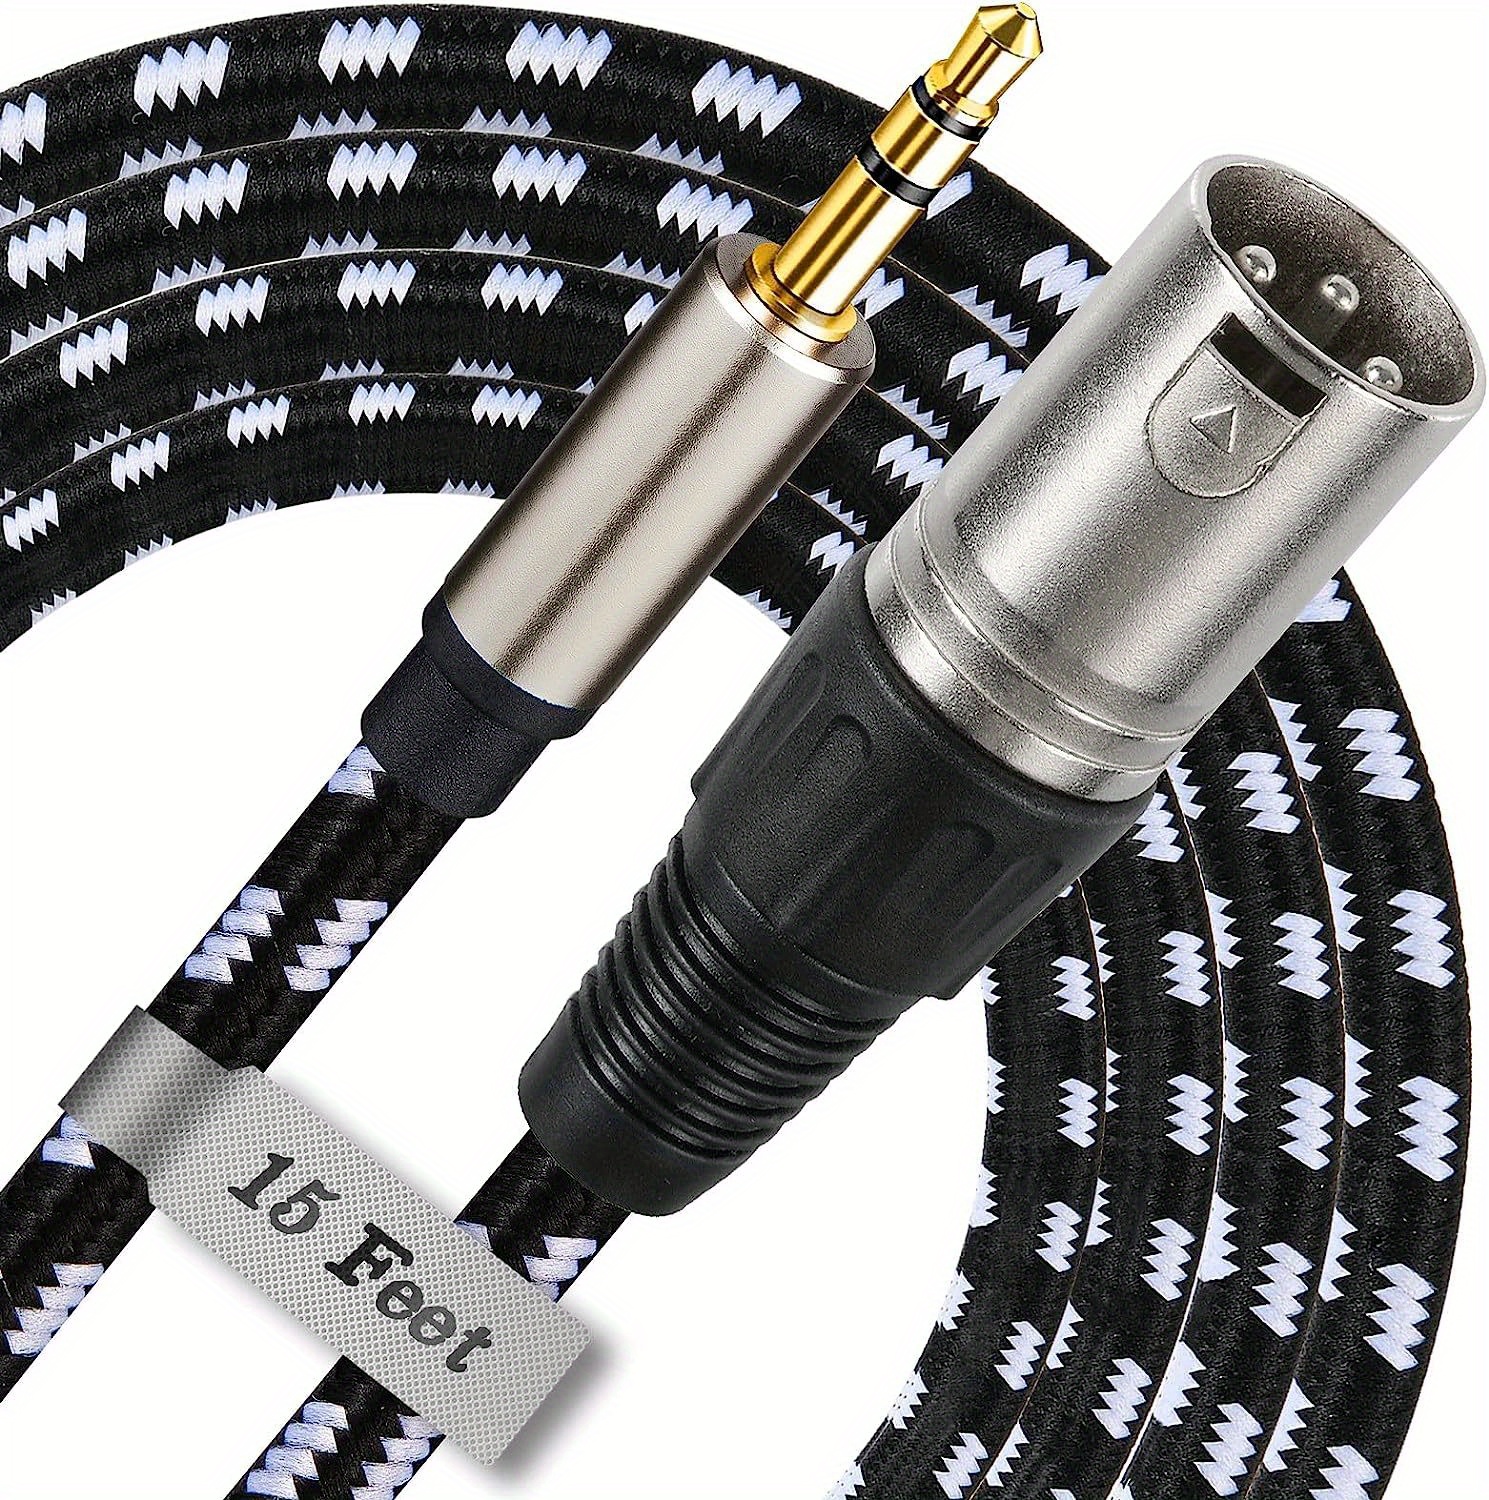 3 Pin Female Xlr To Trs Stereo Jack Cable Adapter For - Temu